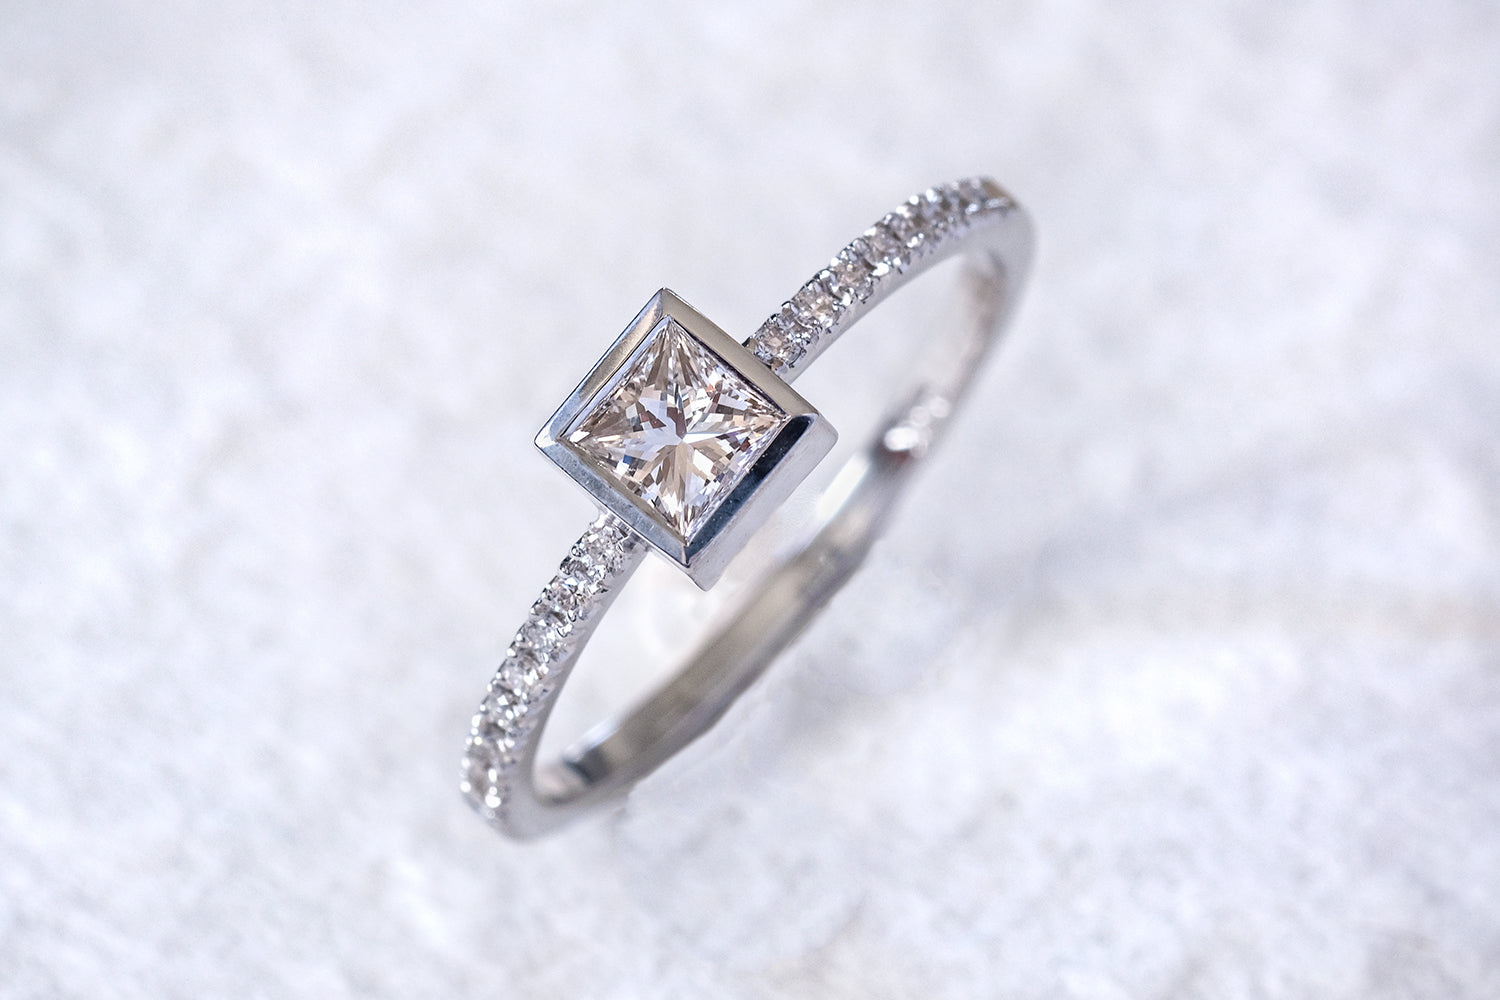 Engagement Ring With A Princess Cut Diamond And Diamonds On the Sides